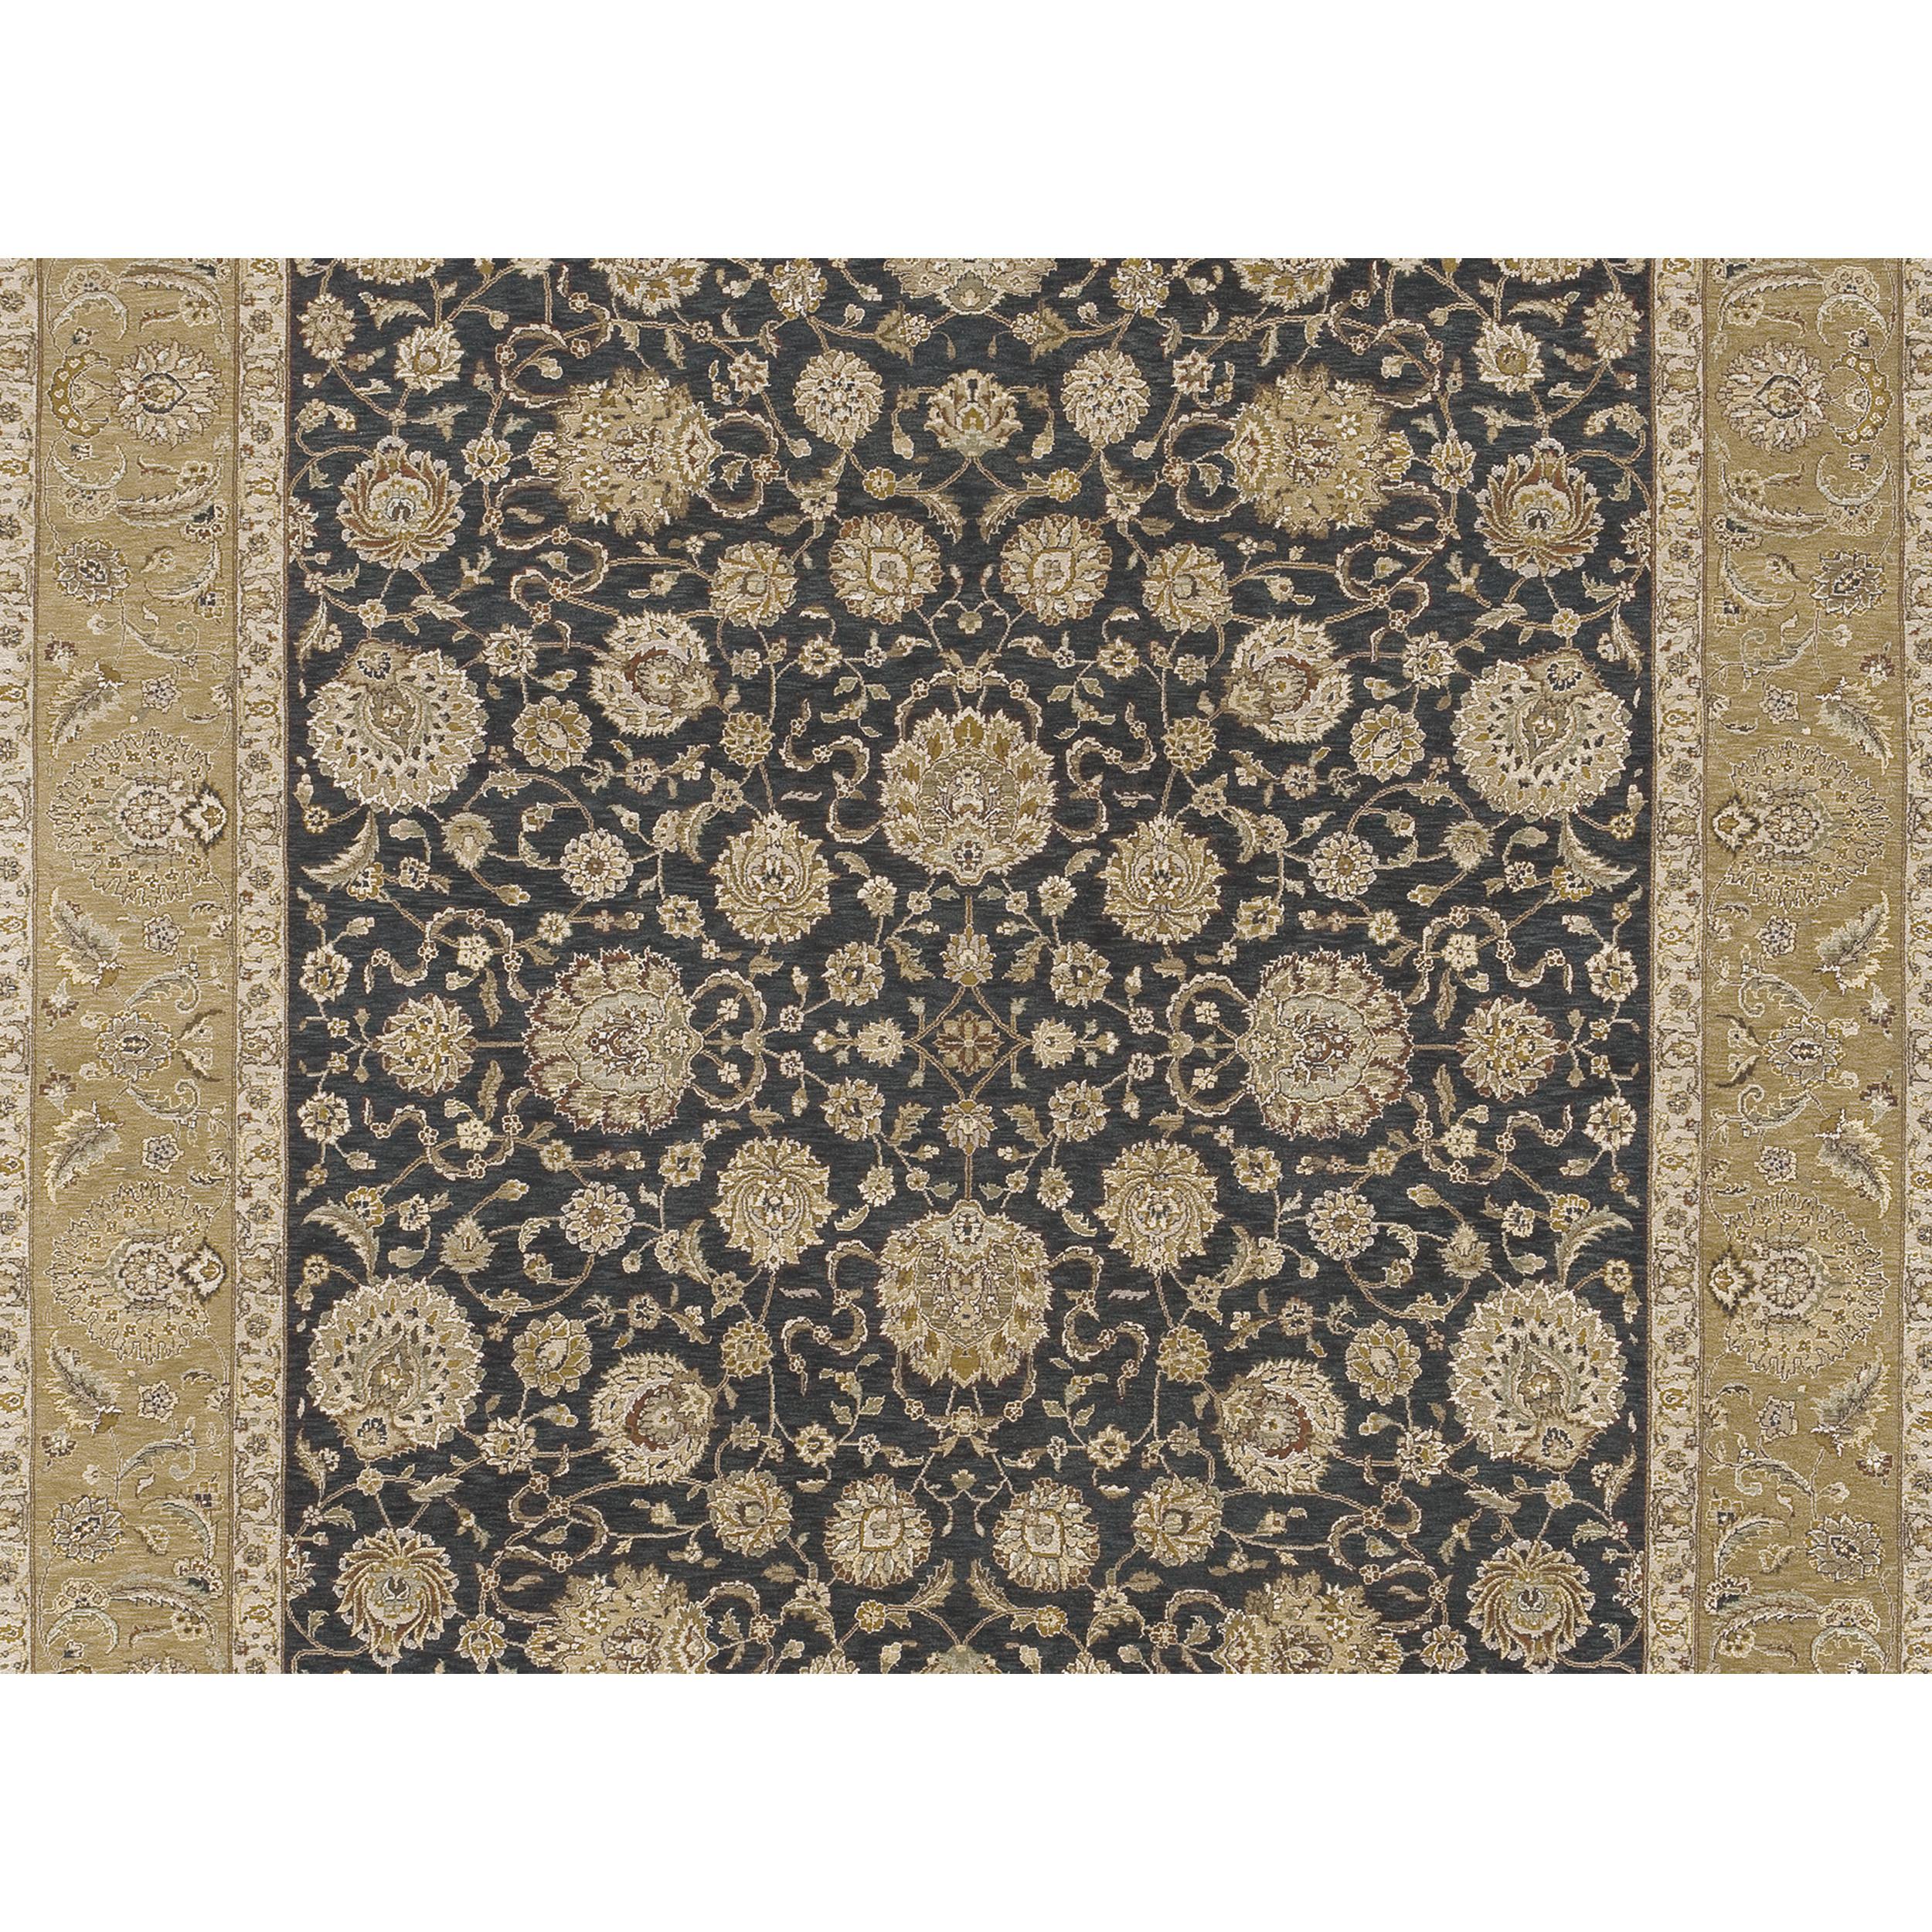 Luxury Traditional Hand-Knotted Kashan Black & Gold 12x15 Rug In New Condition For Sale In Secaucus, NJ